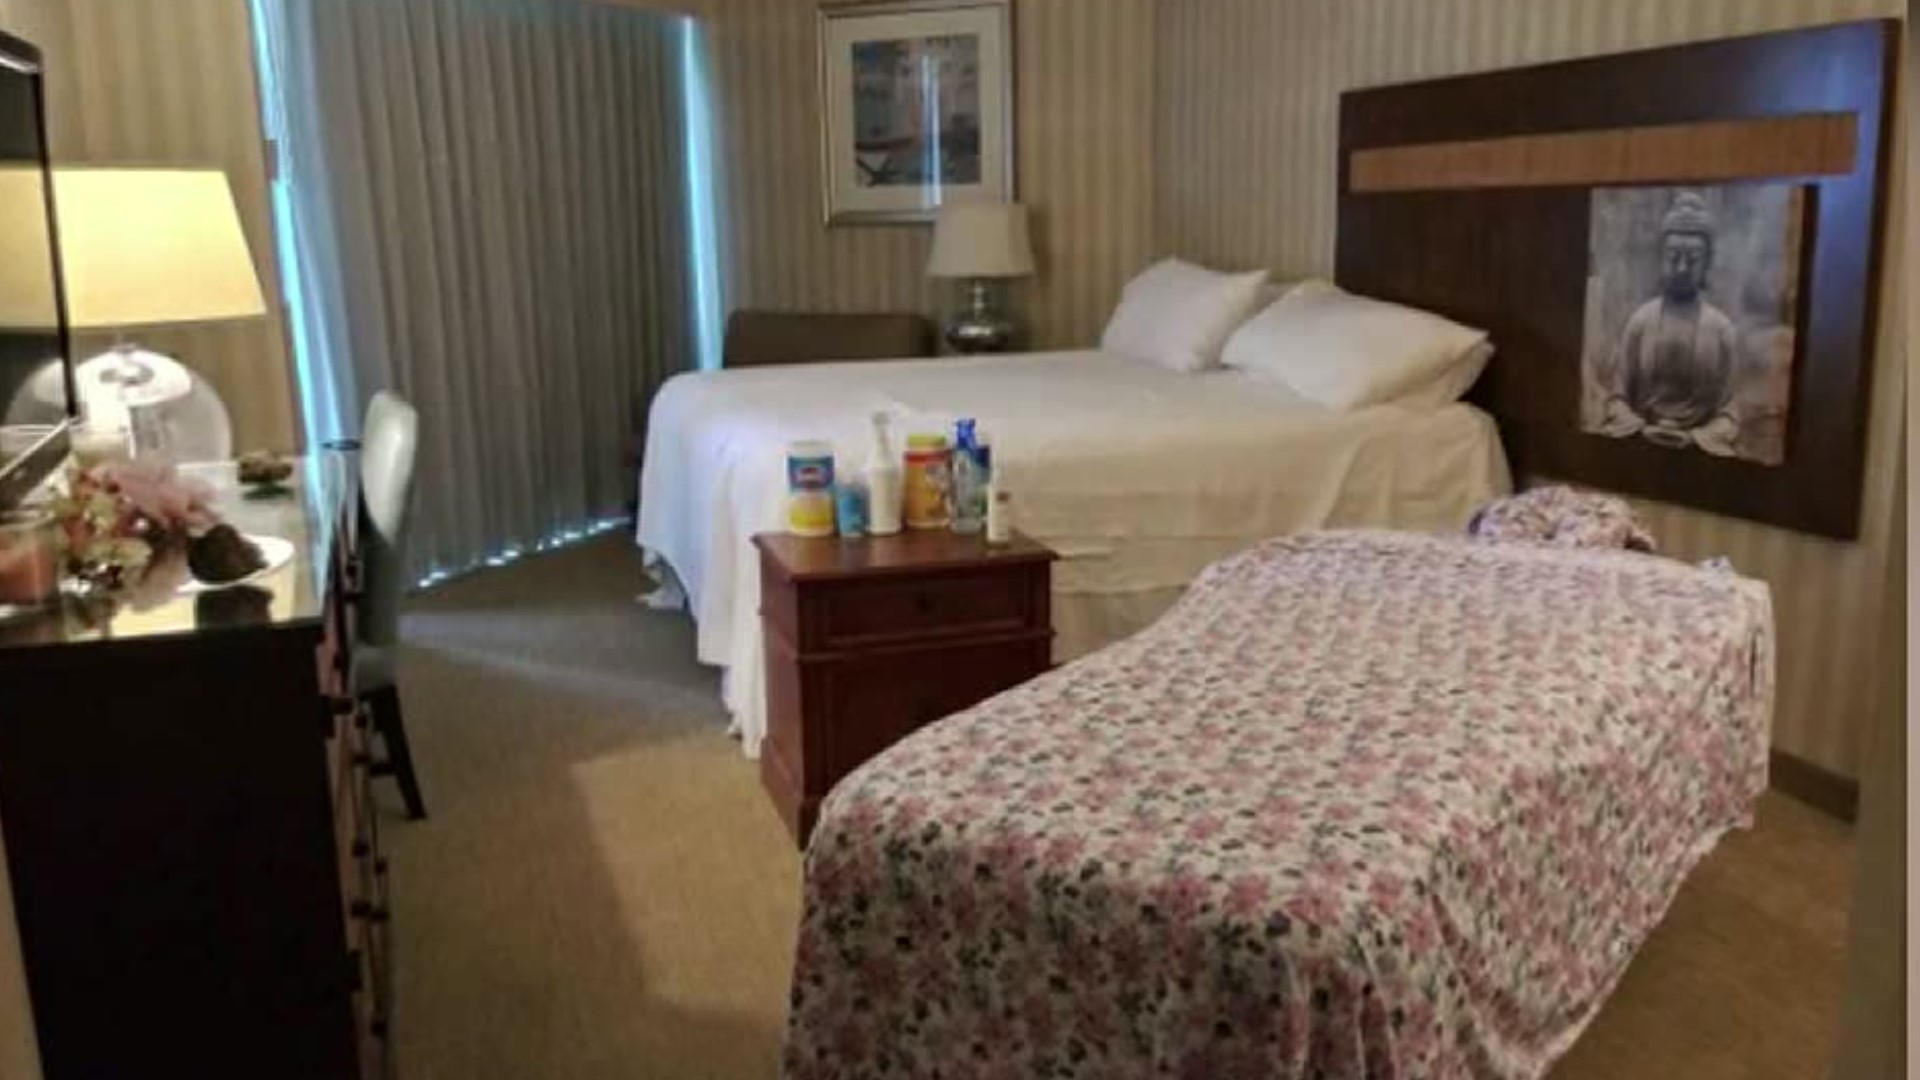 Nearly 300 nurses from all over the nation are staying in hotel rooms in Corpus Christi.